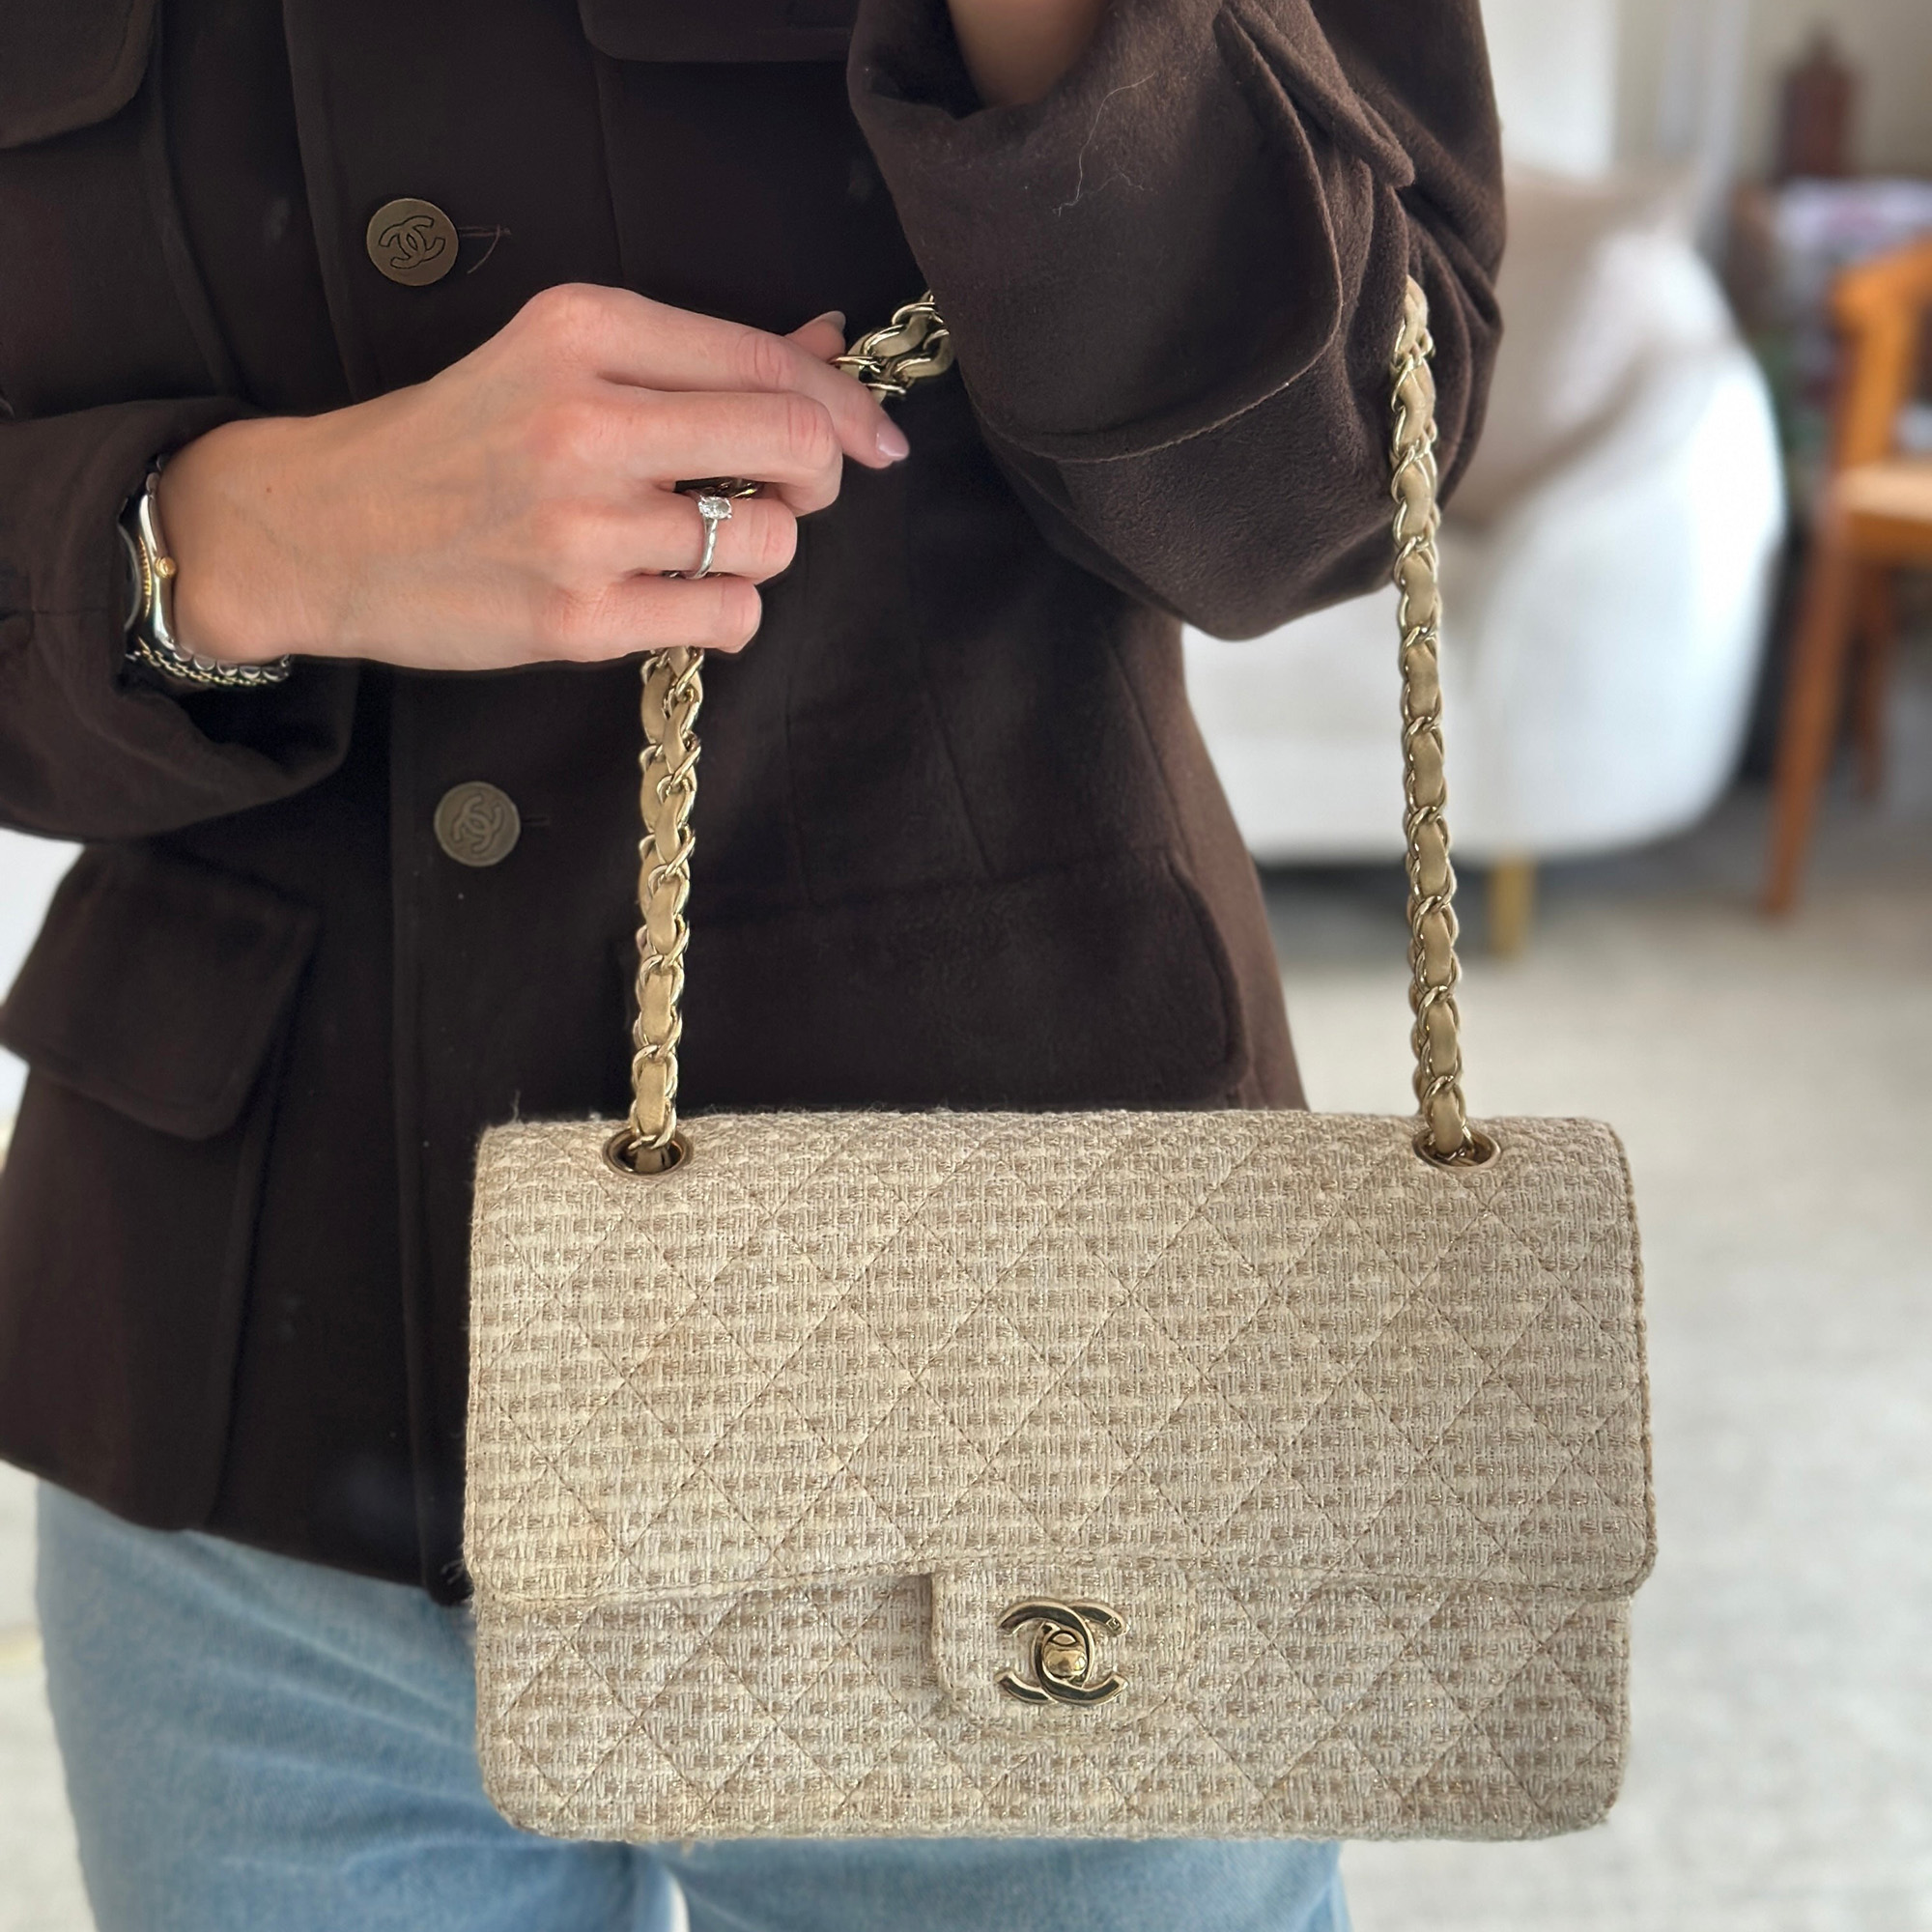 Chanel Medium Classic Double Flap Bag In Beige And Gold Tweed With Champagne Gold Hardware